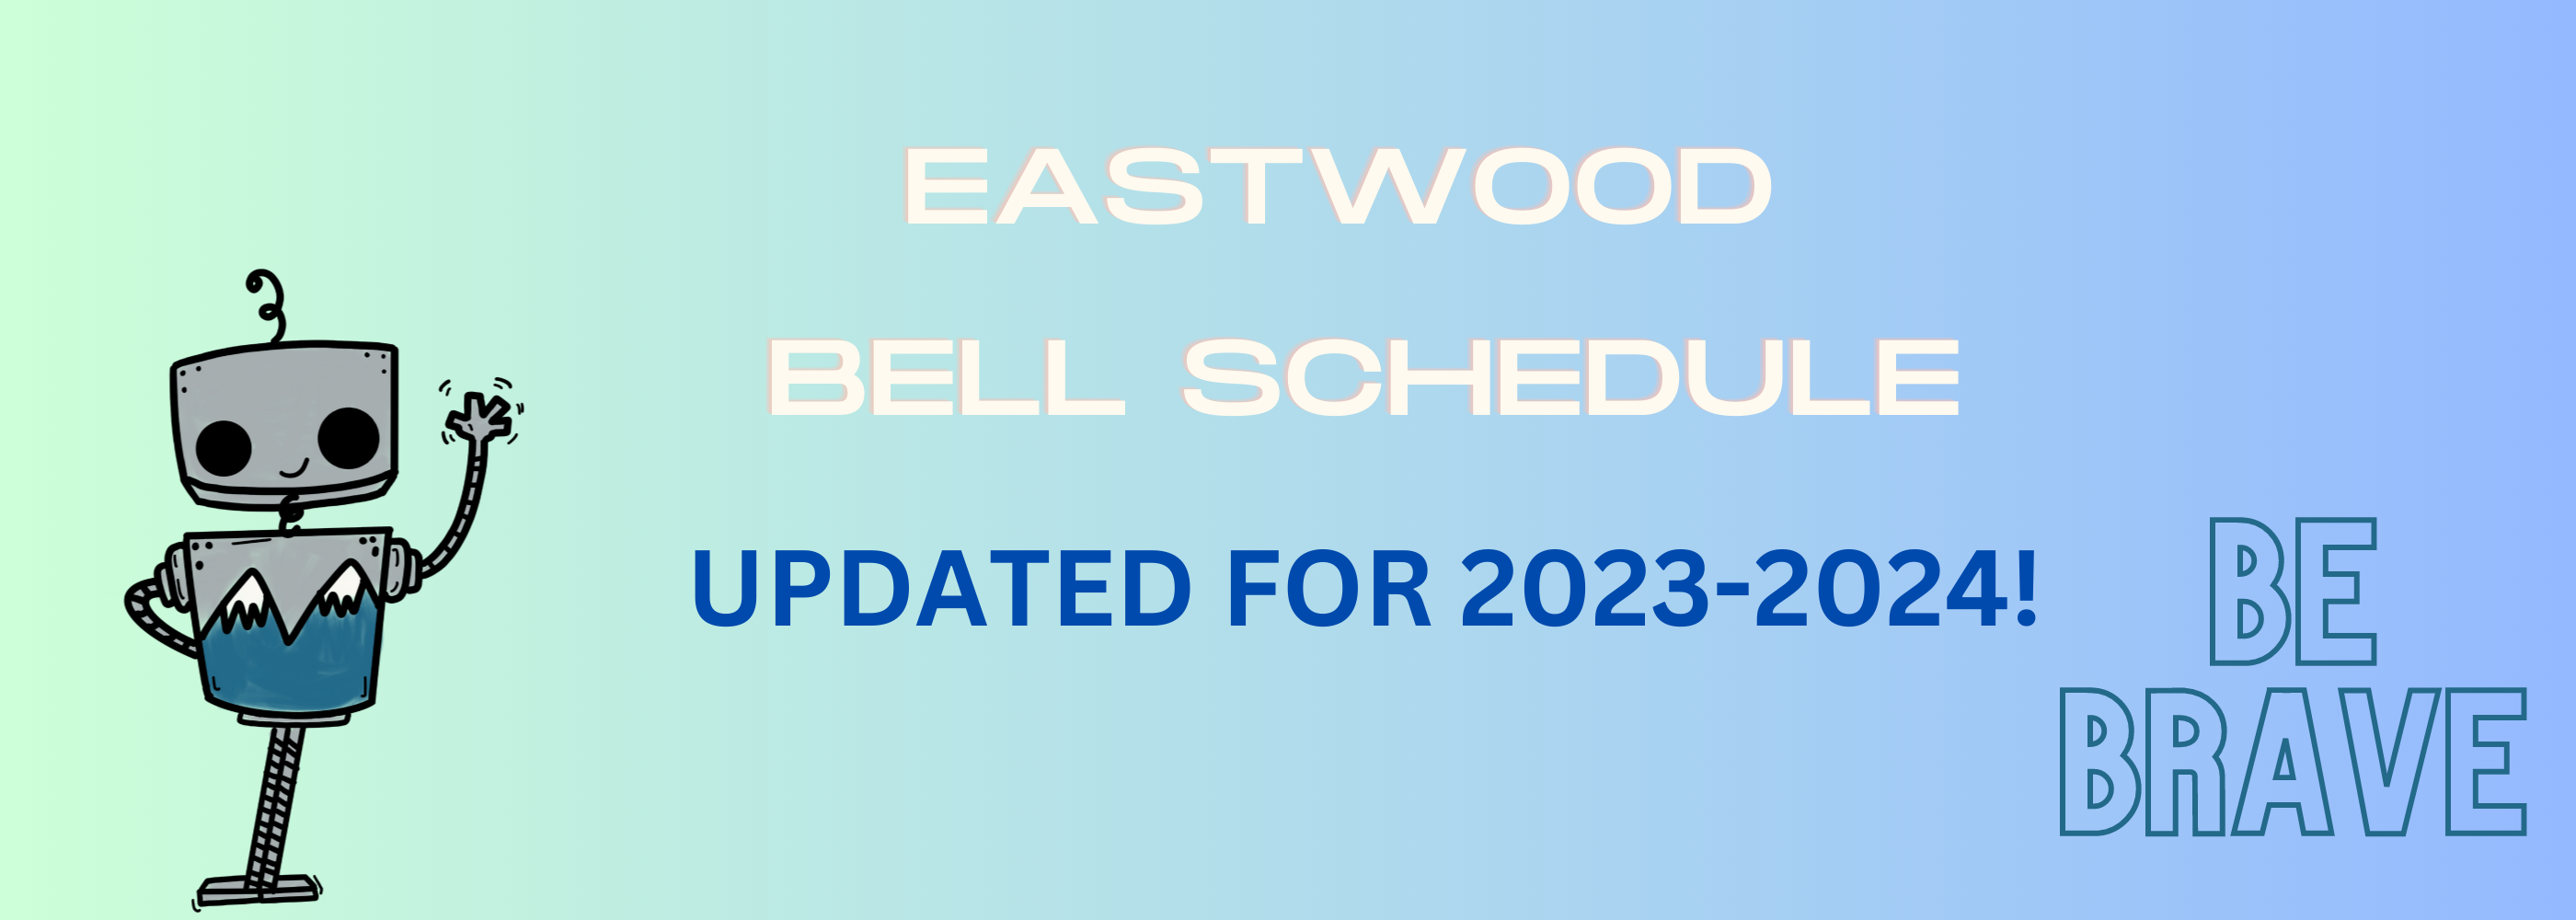 Eastwood Bell Schedule Updated for 2023-2024